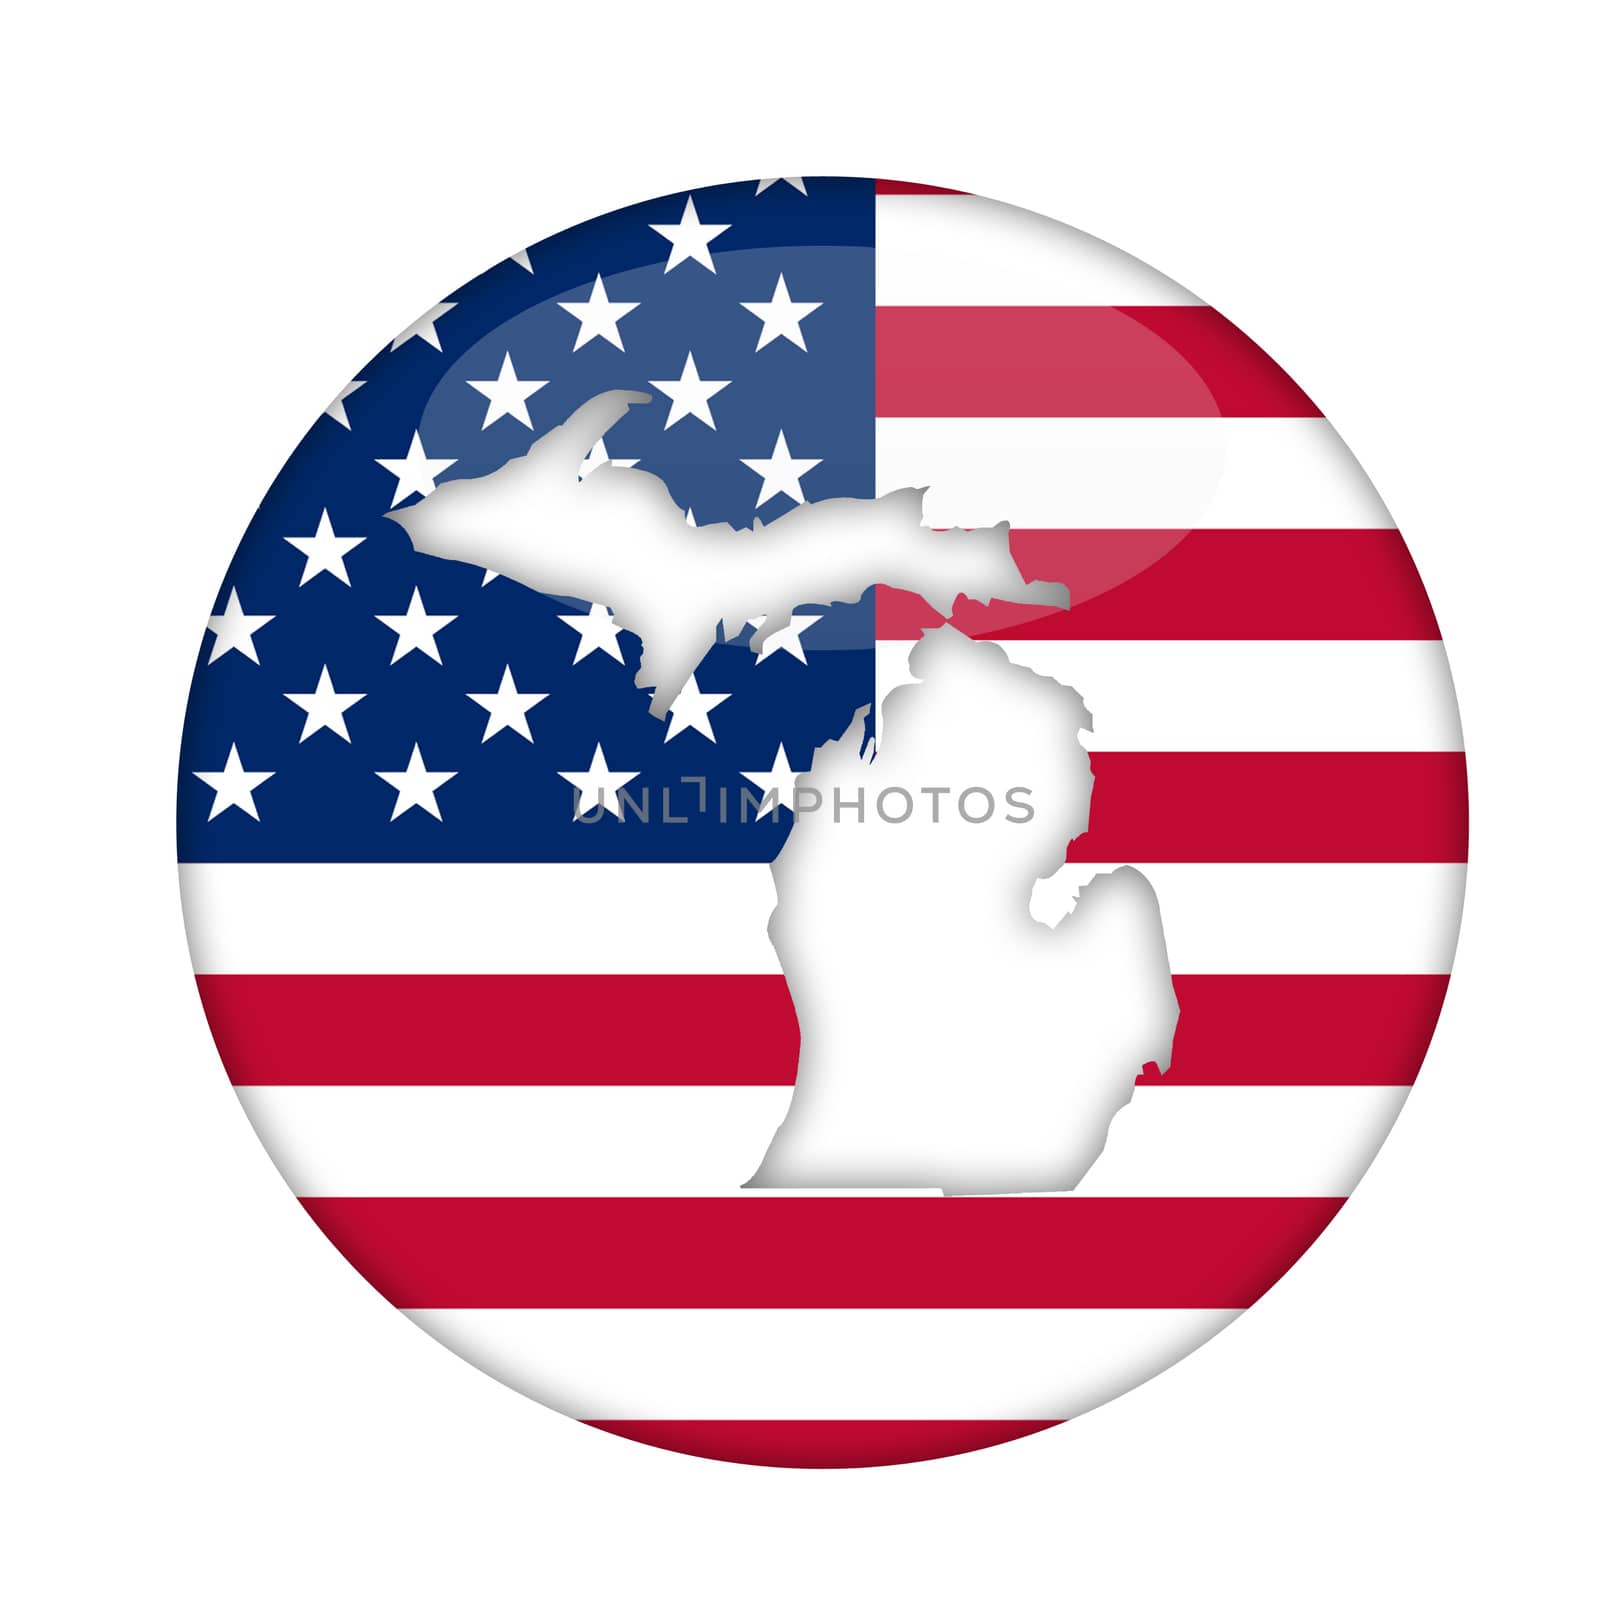 Michigan state of America badge by speedfighter